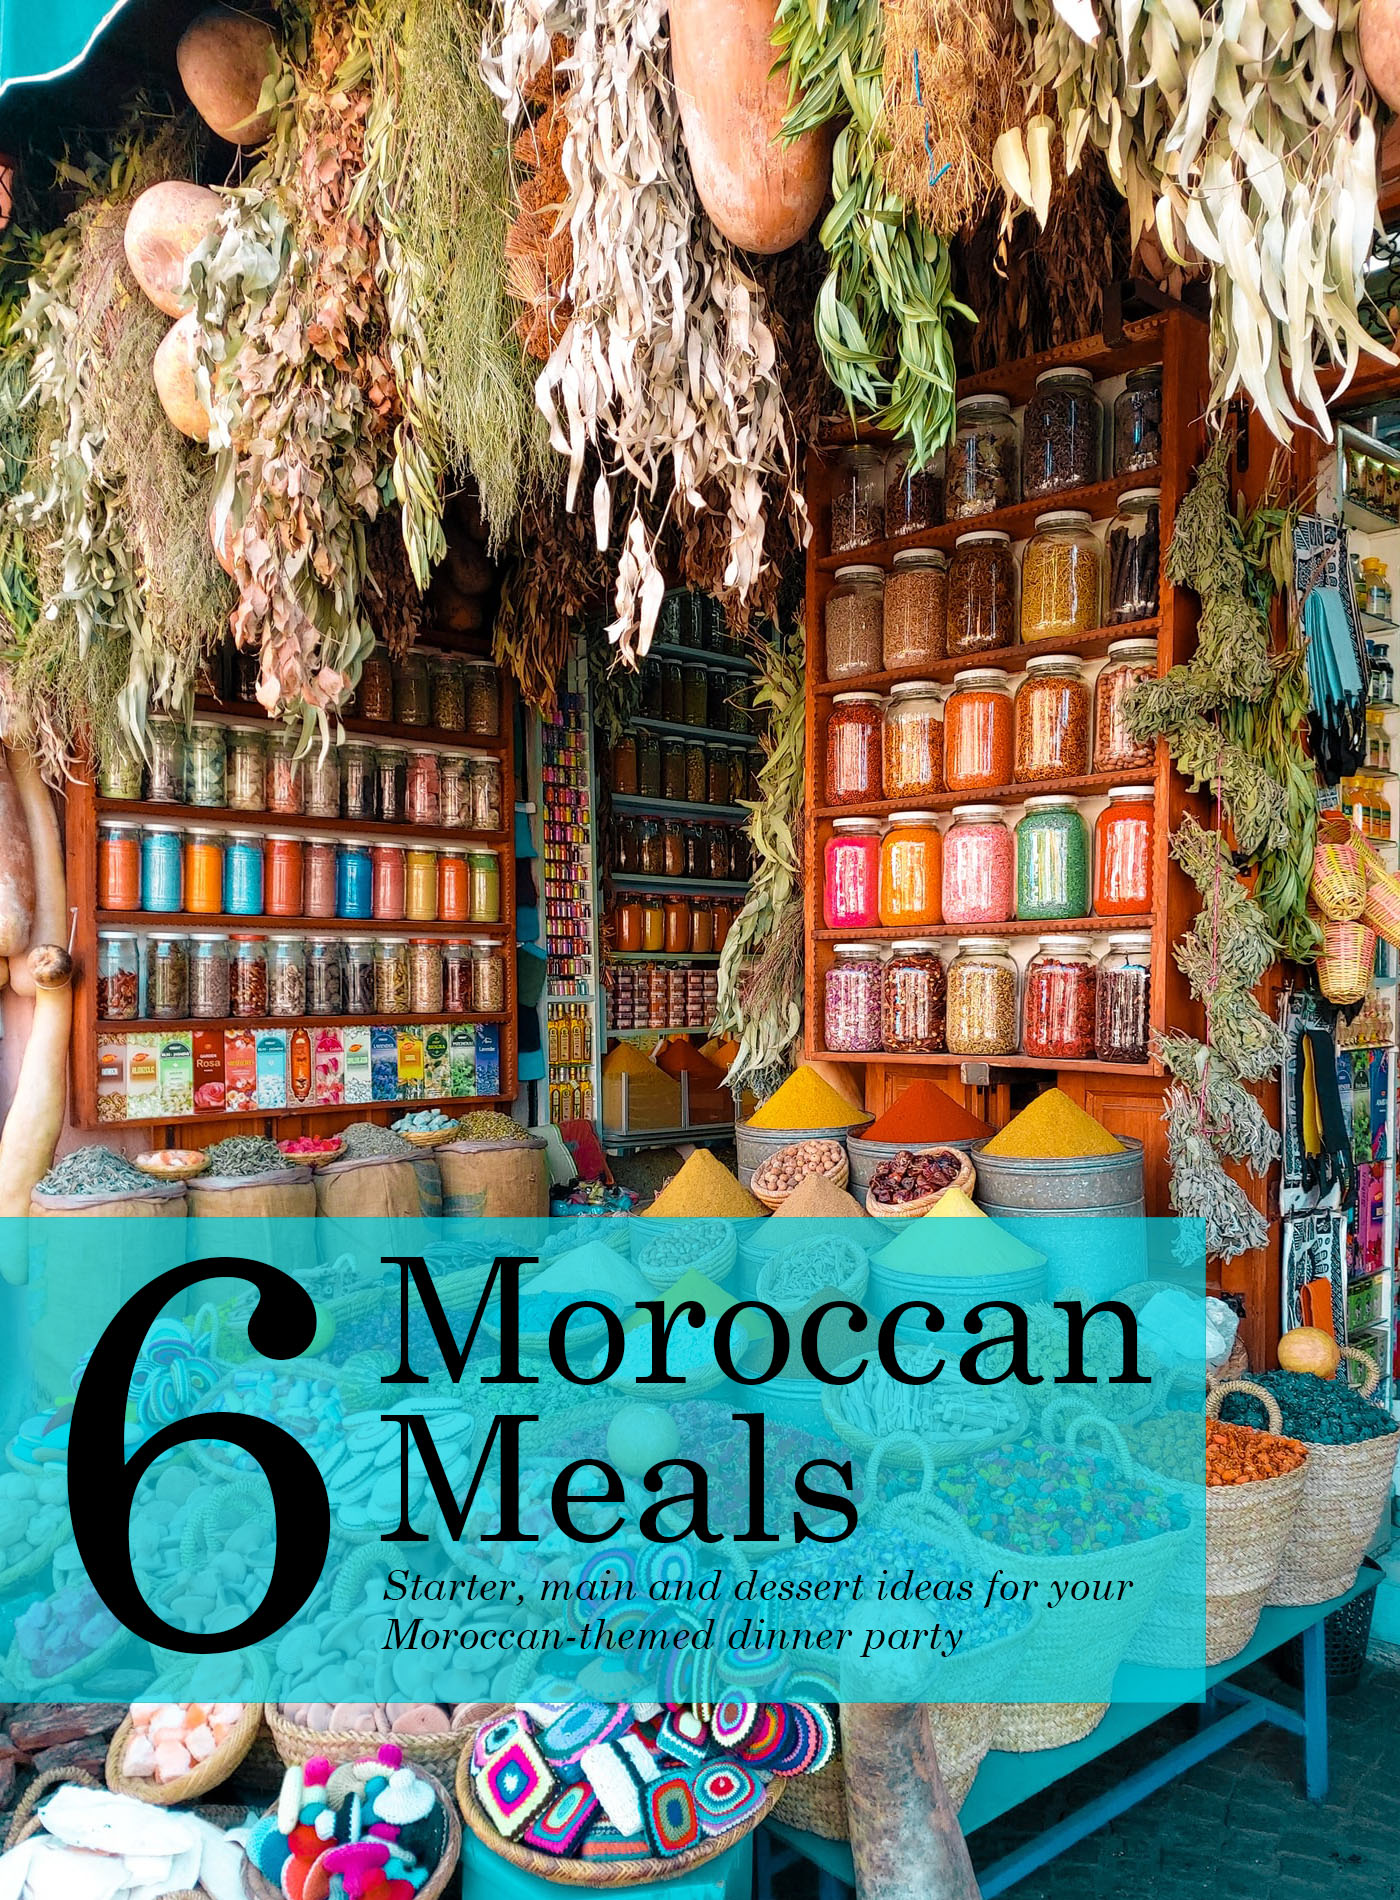 An array of spices displayed on a Moroccan street market with the title of the book cover.